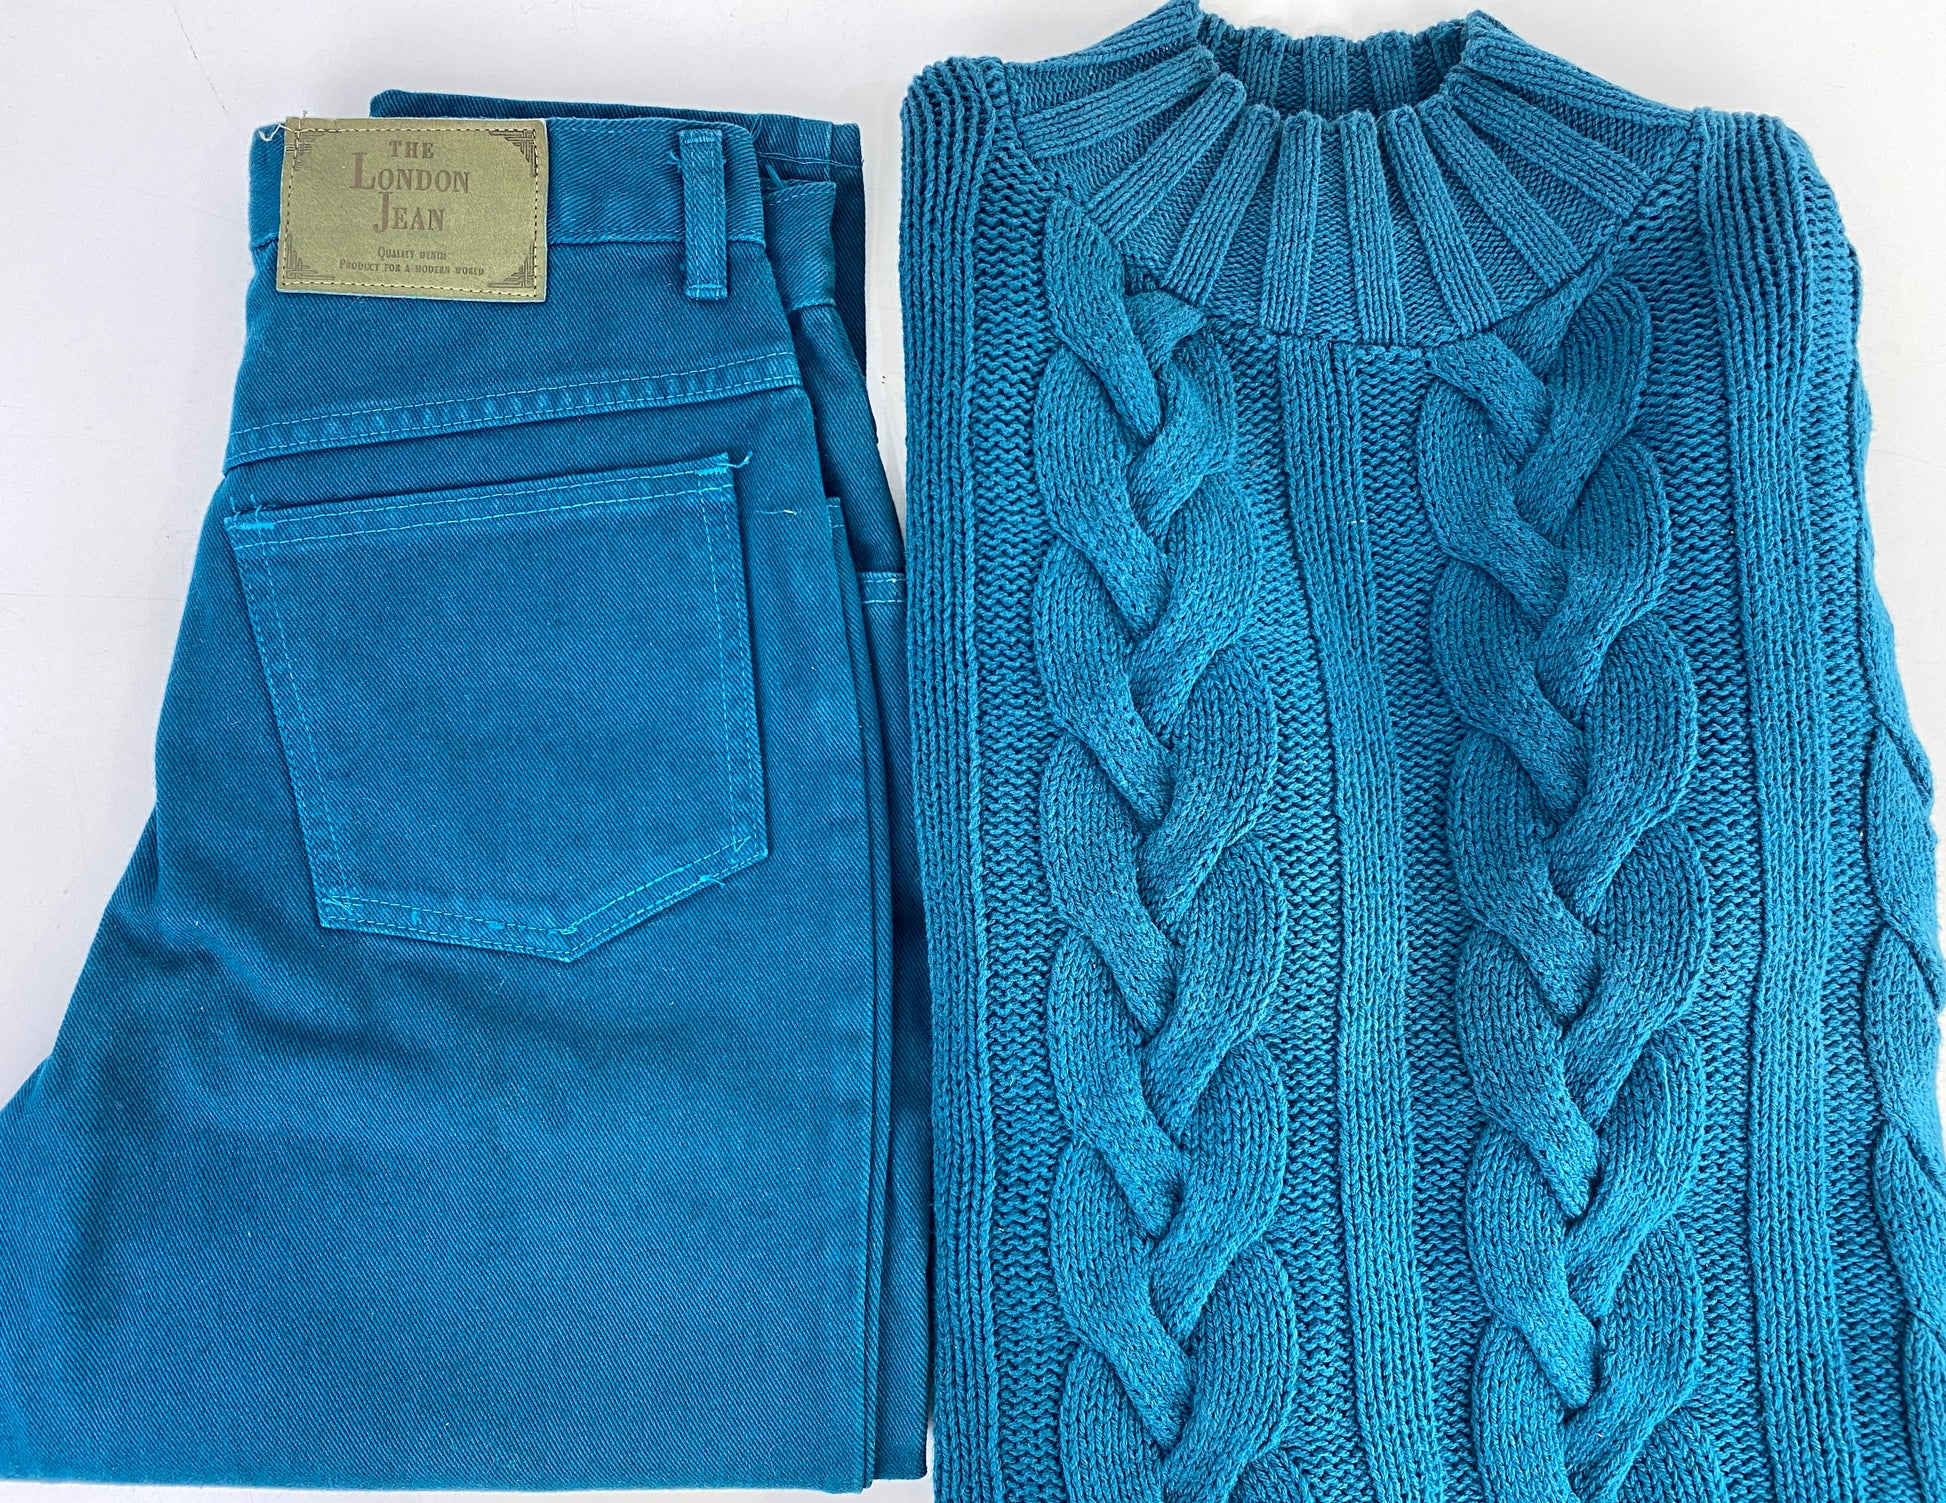 Vintage 1990s Deadstock Coloured Denim Mom Jeans and Cotton Cable Knit Sweater Set, x4 Colours Available